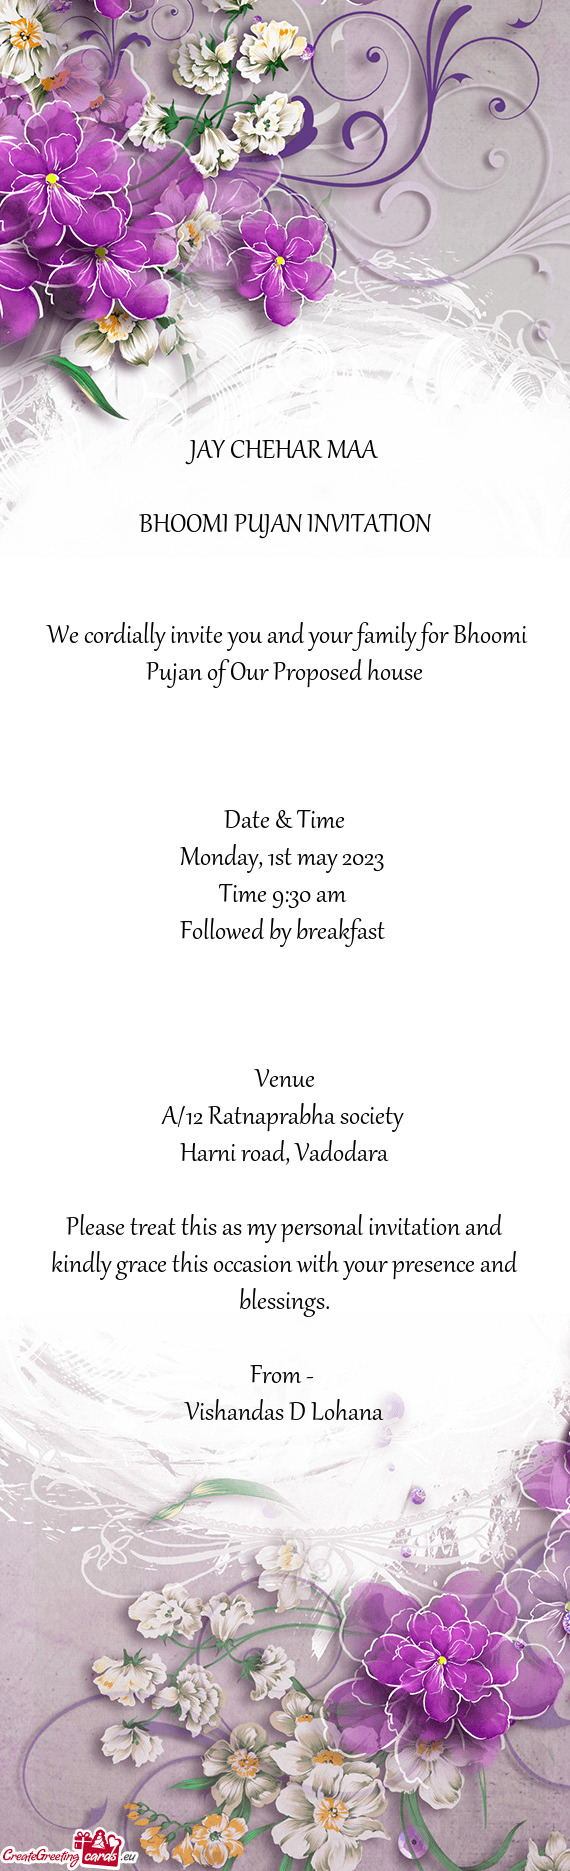 We cordially invite you and your family for Bhoomi Pujan of Our Proposed house